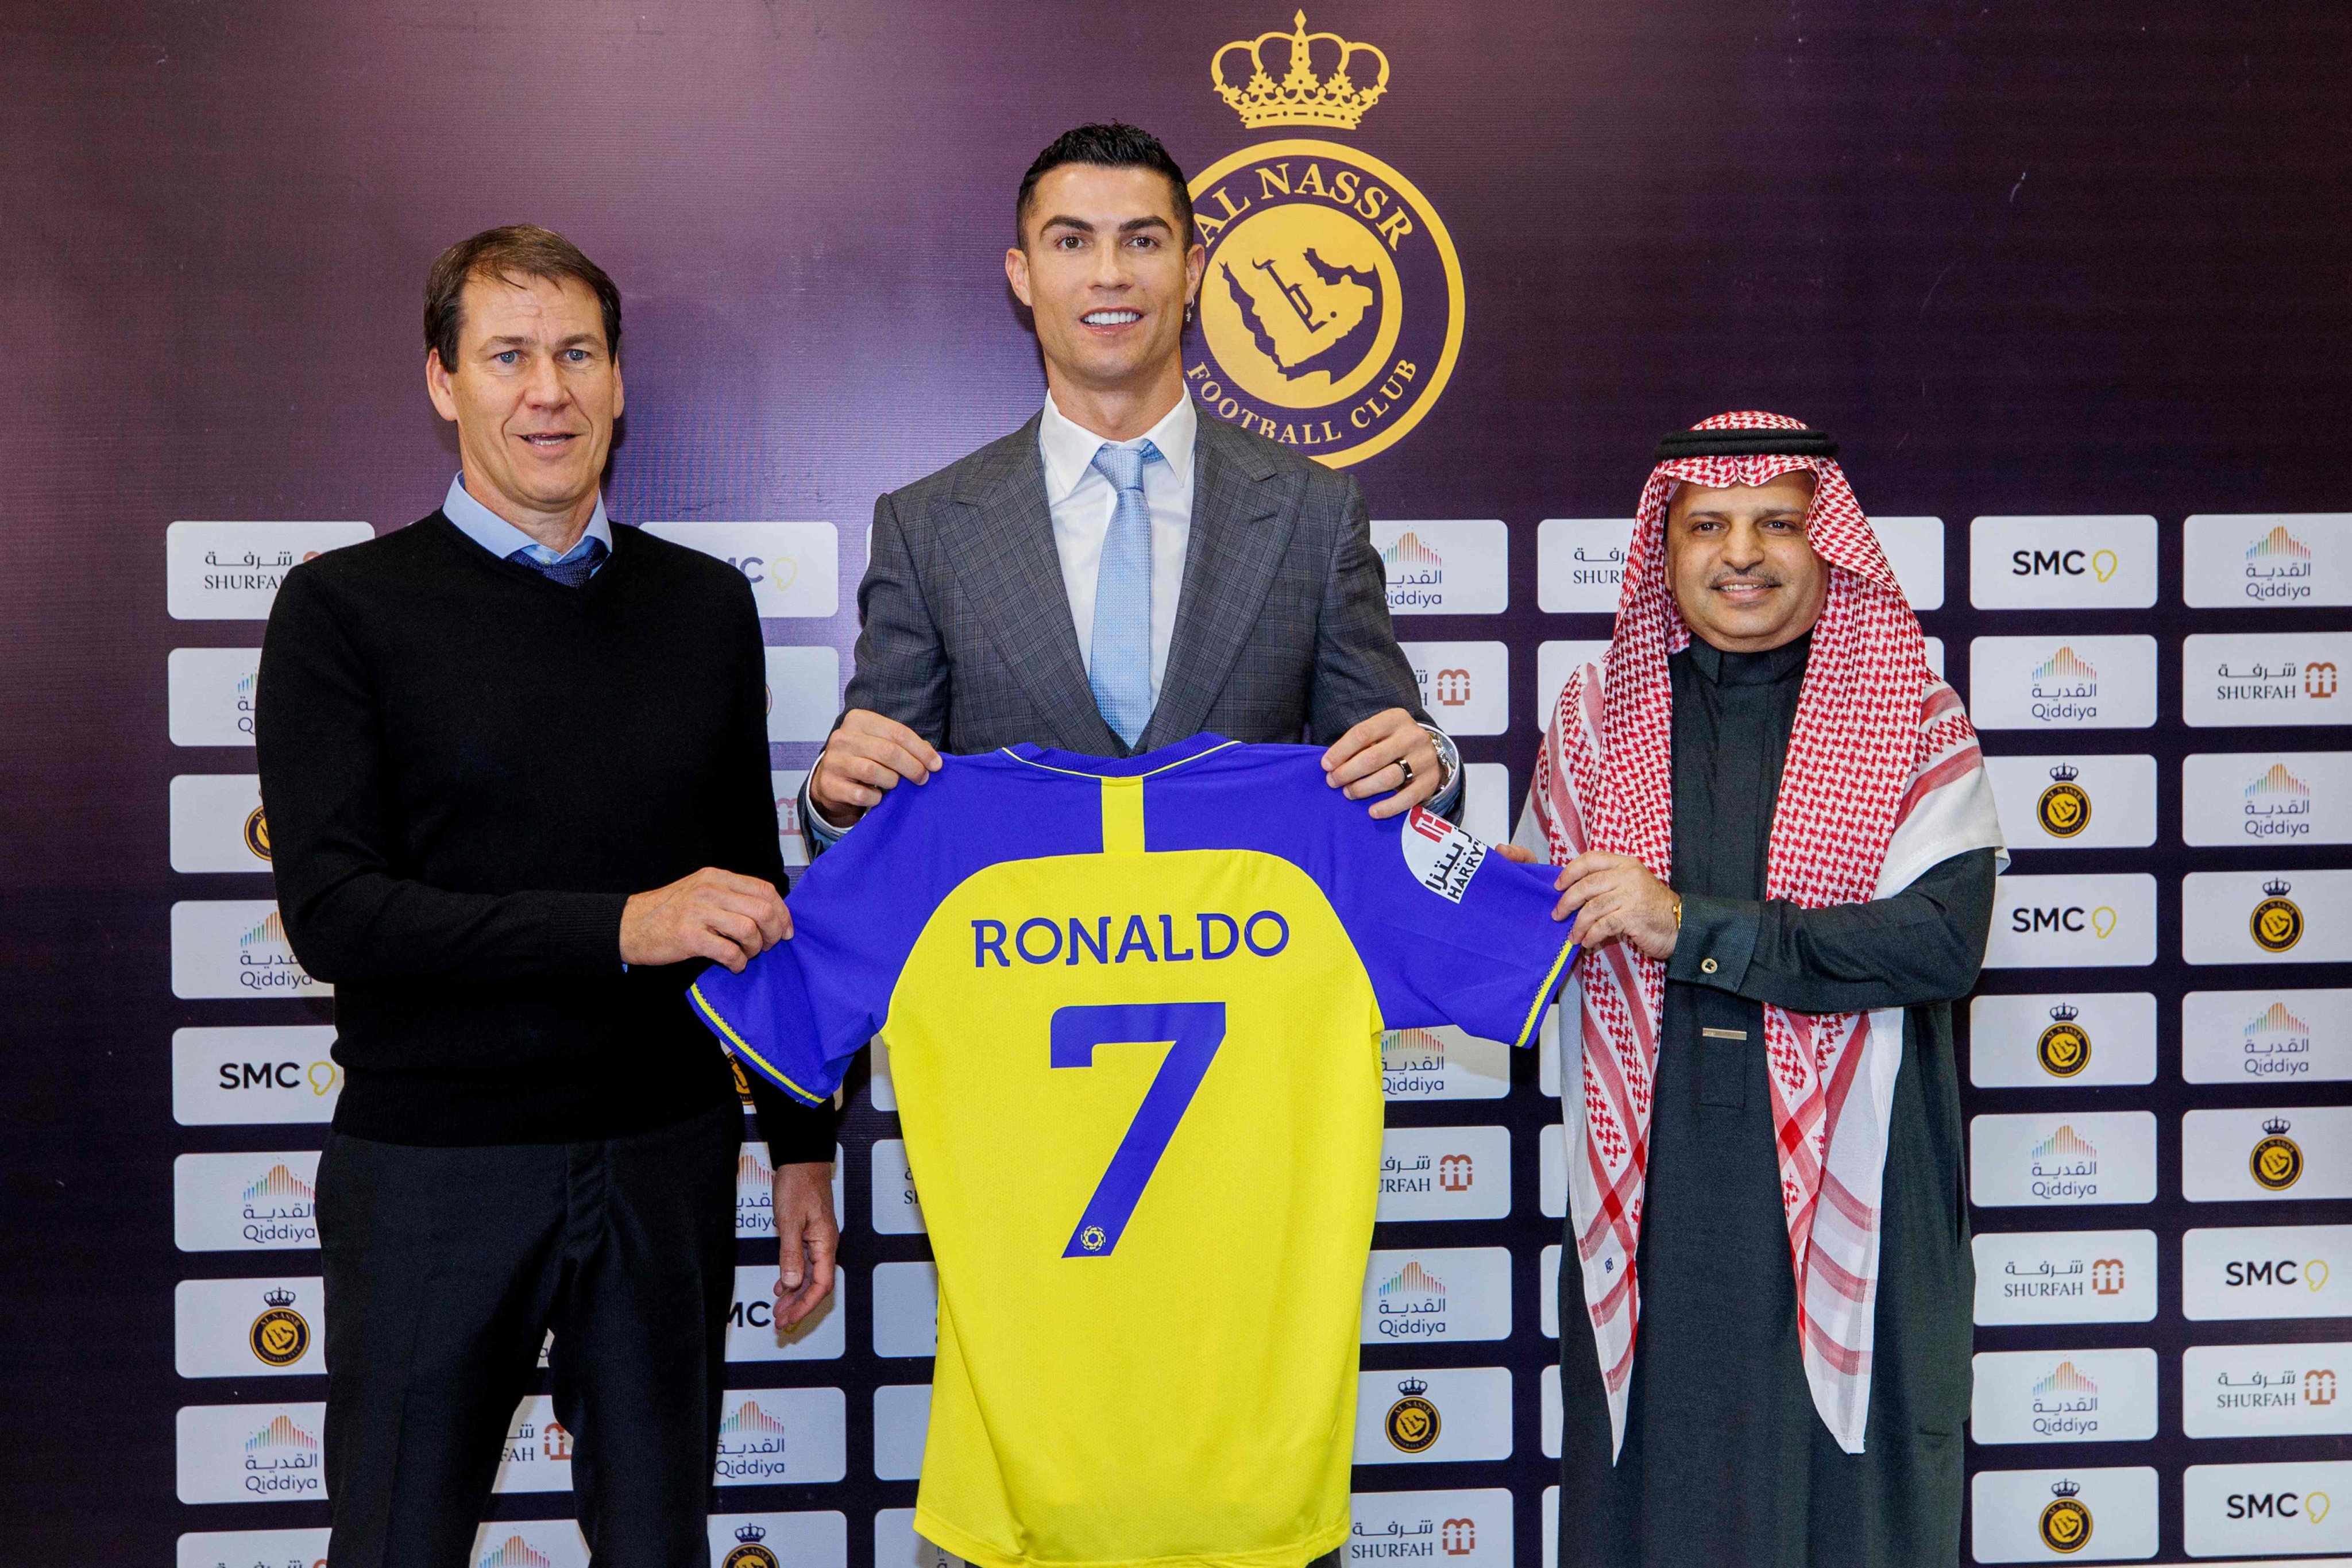 Cristiano Ronaldo poses with Al Nassr shirt alongside French coach Rudi Garcia (left) and club president Musalli Al-Muammar during a press conference at the Mrsool Park Stadium. Photo: AFP